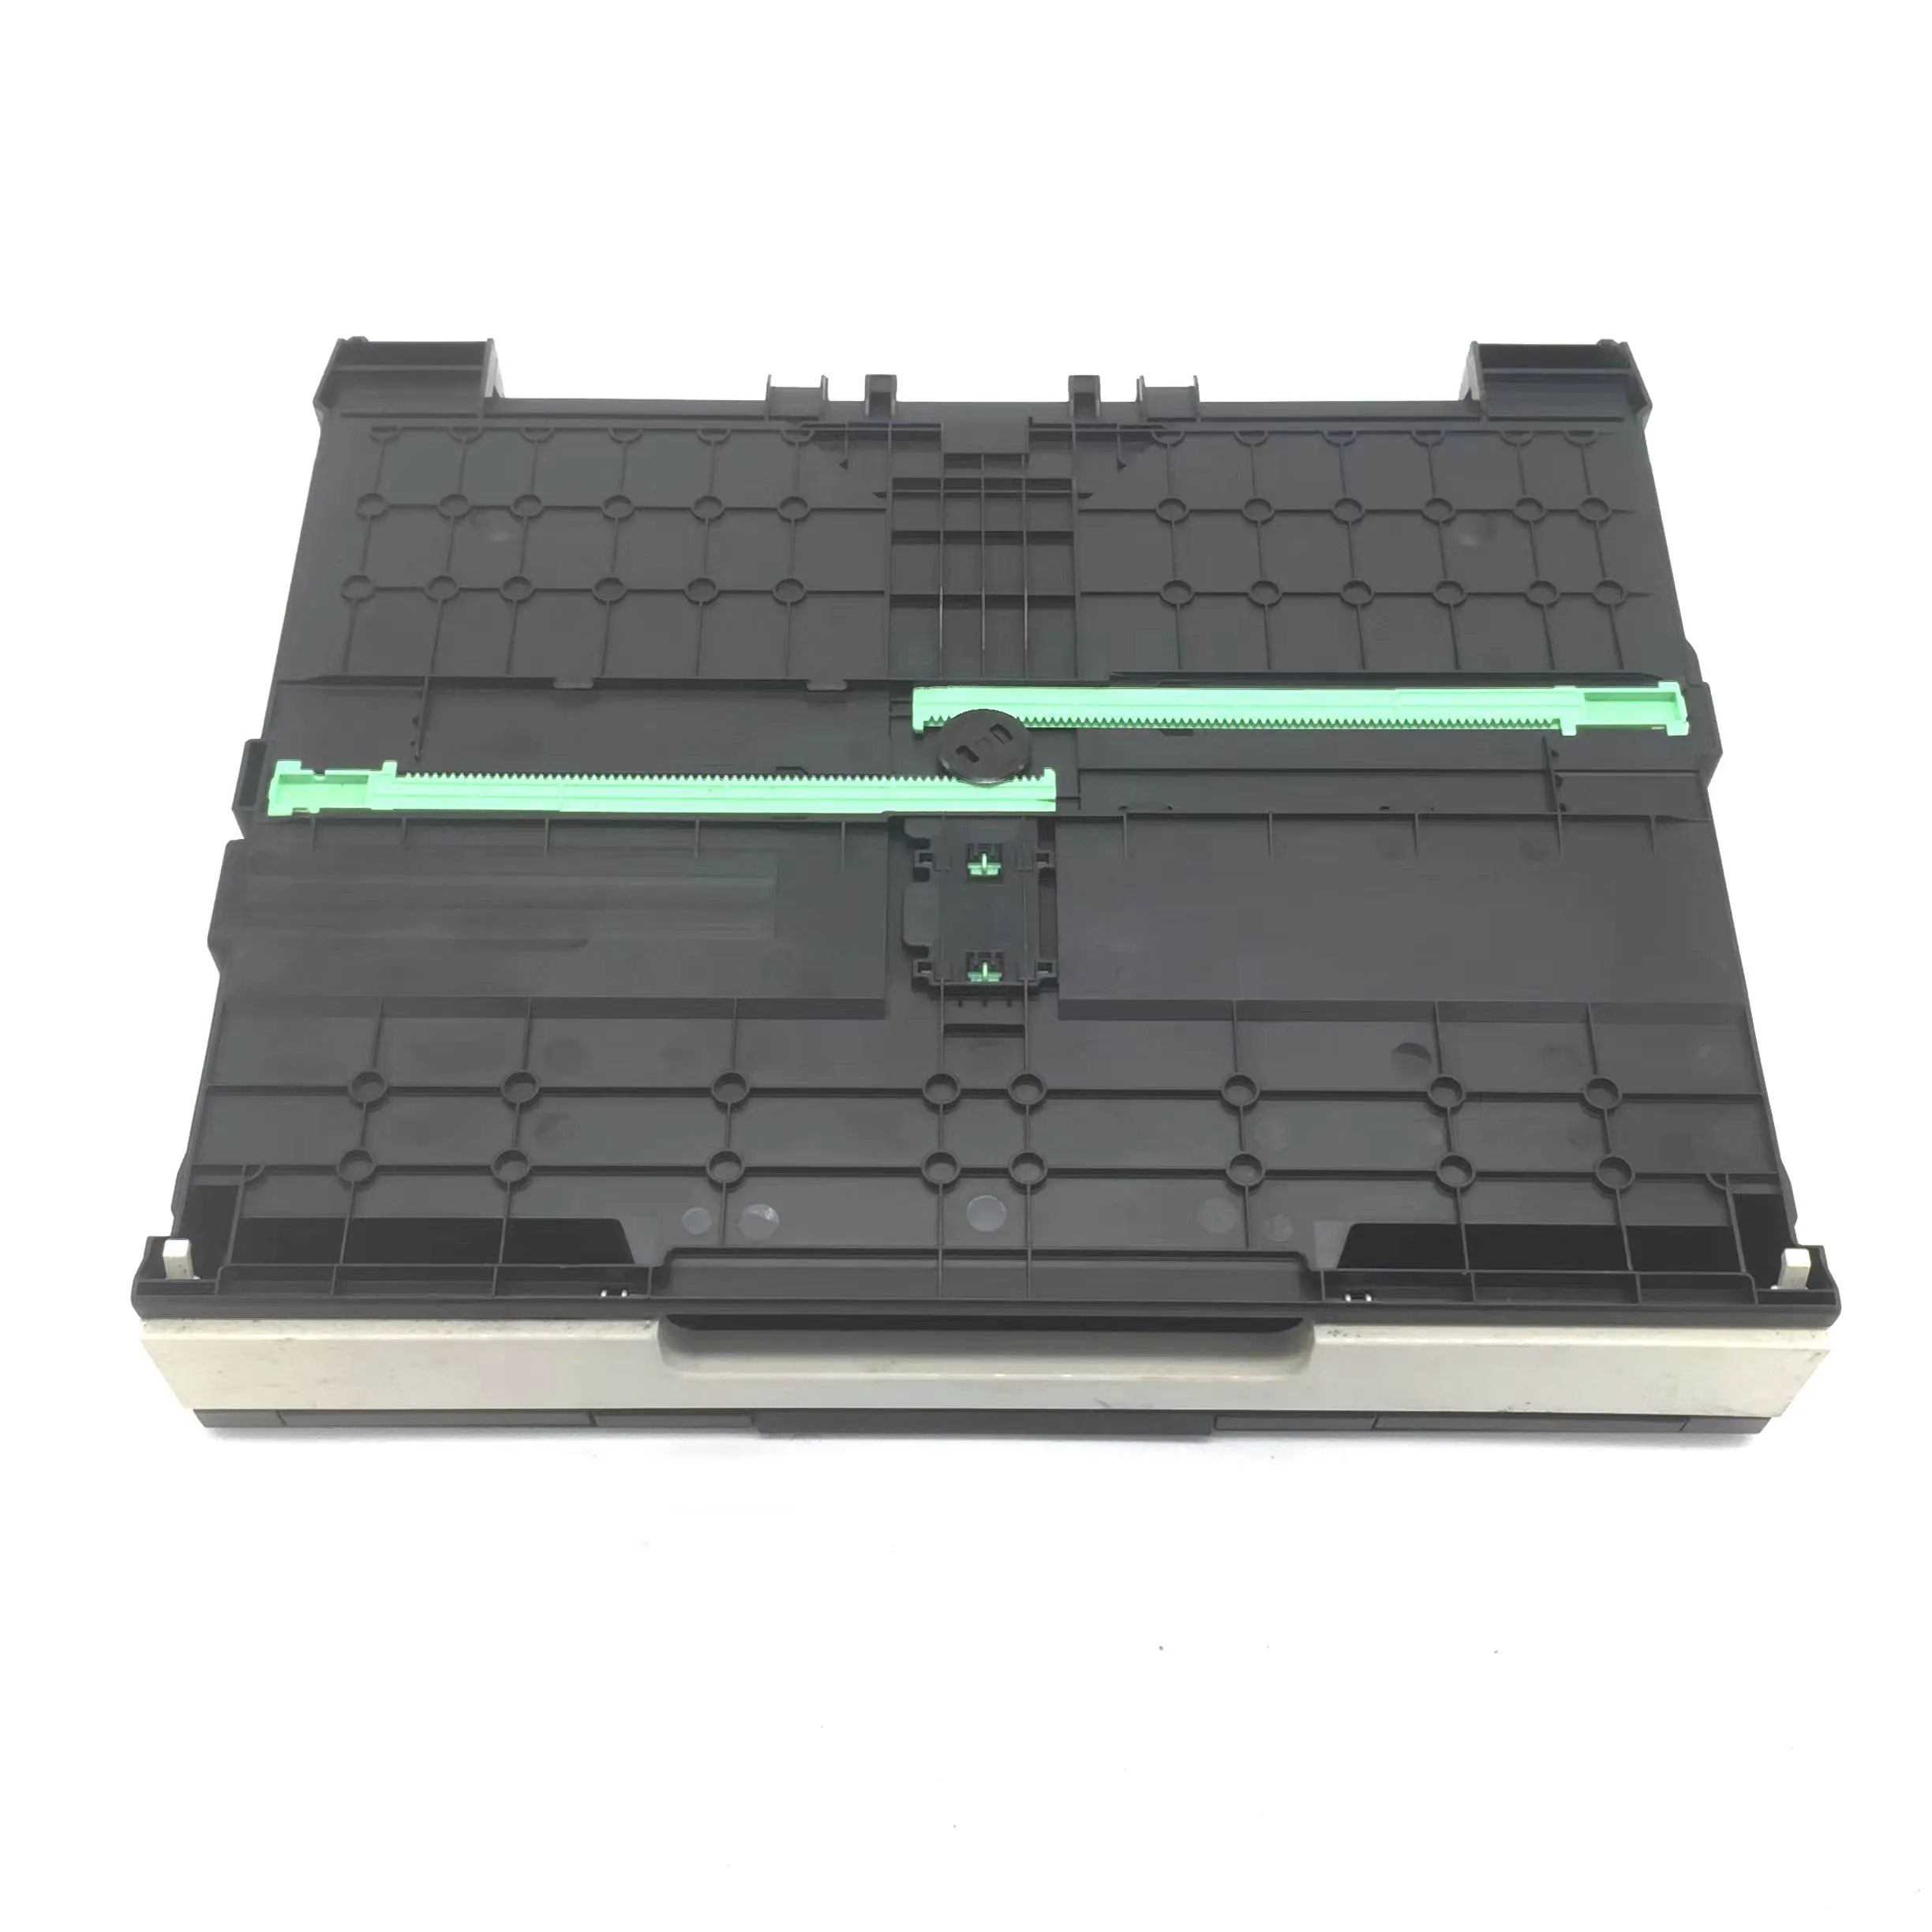 Paper input tray1 MFC-J4710DW LED578 fits for Brother dcp-j4110dw mfc-4610dw mfc-j2510dw mfc-j6920dw mfc-4510dw